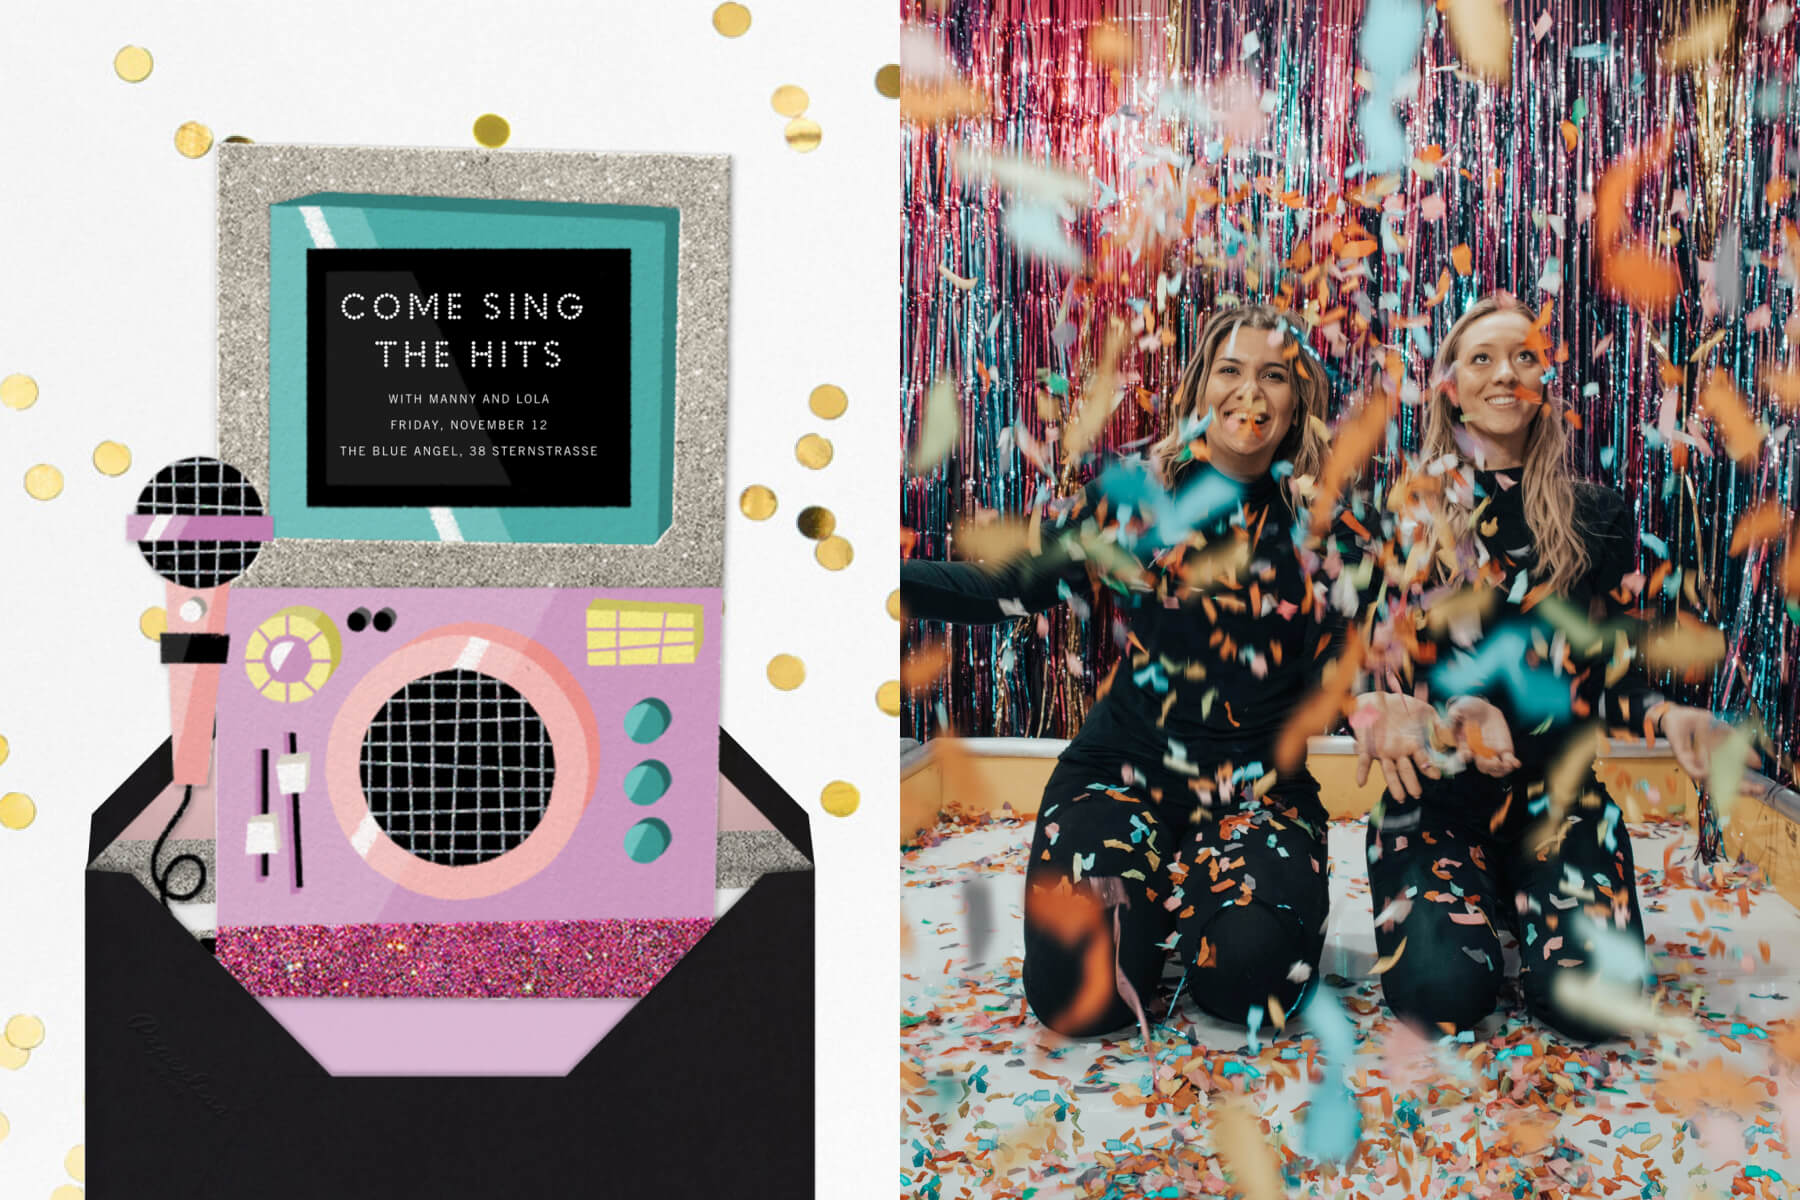 Left: A sparkly invitation shaped like a karaoke machine with a microphone; right: two young women kneeling and throwing confetti.